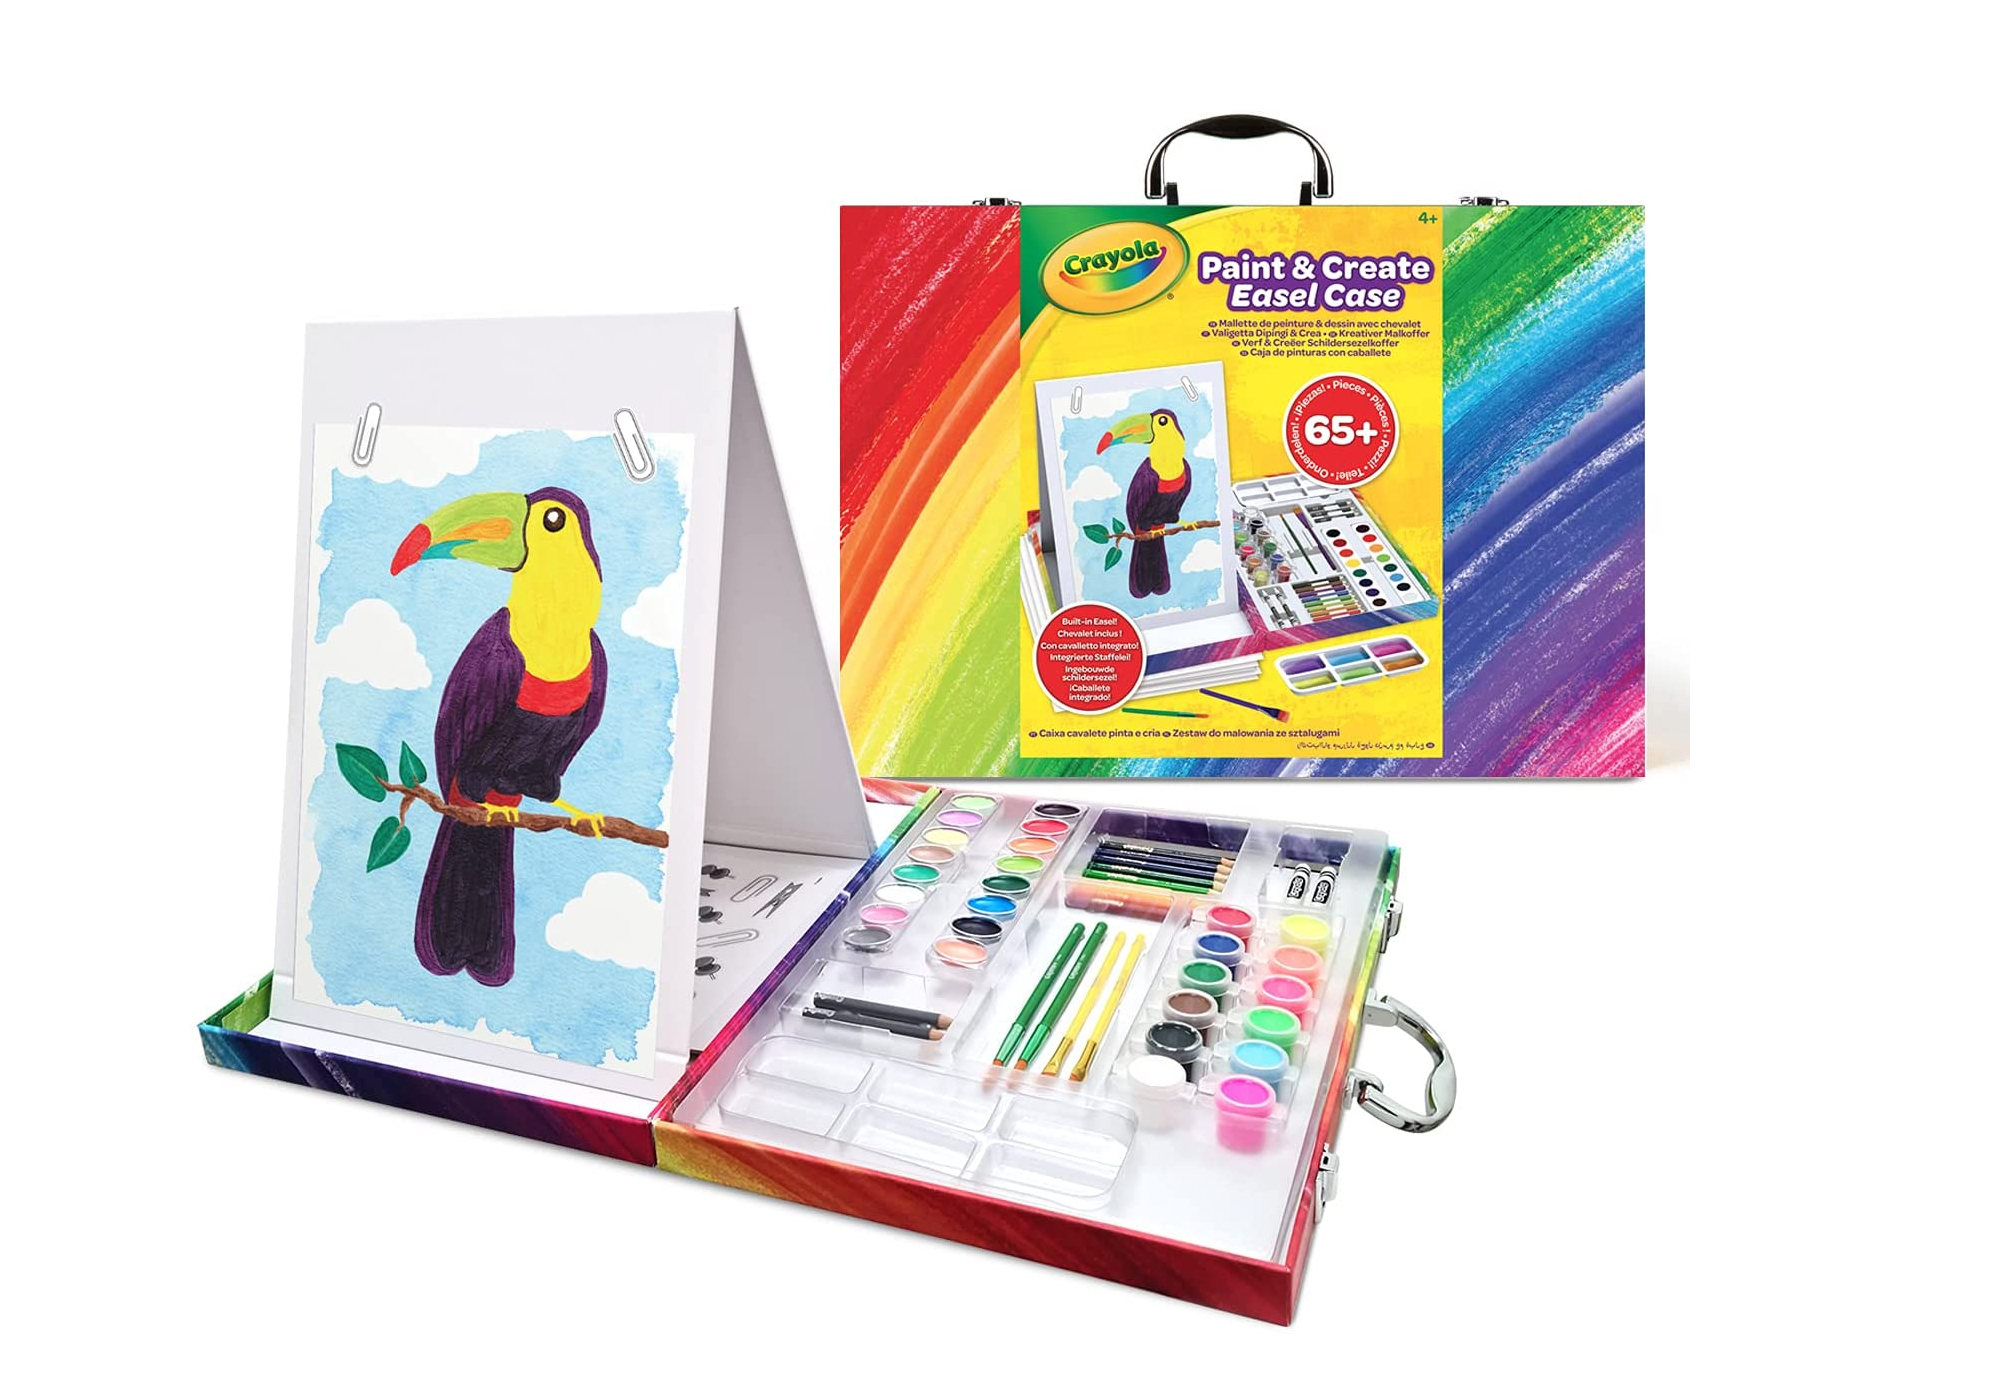 Crayola Spin and Spiral Deluxe Edition